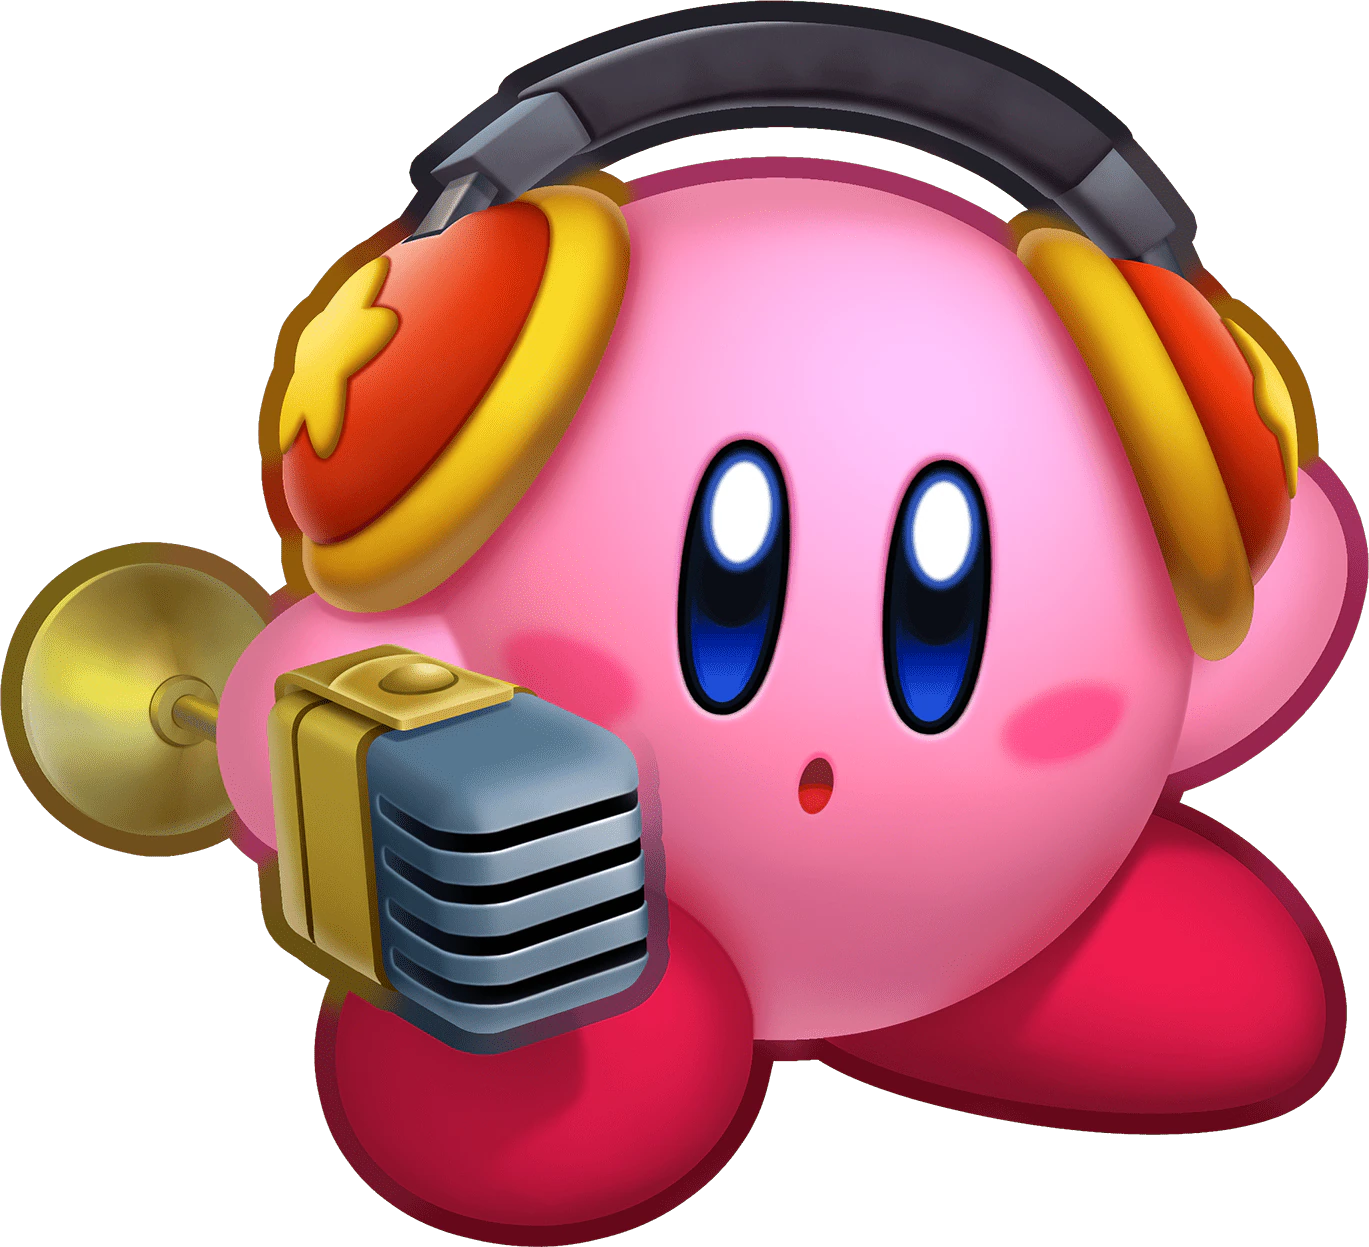 Kirby Wii Music Selection - WiKirby: it's a wiki, about Kirby!